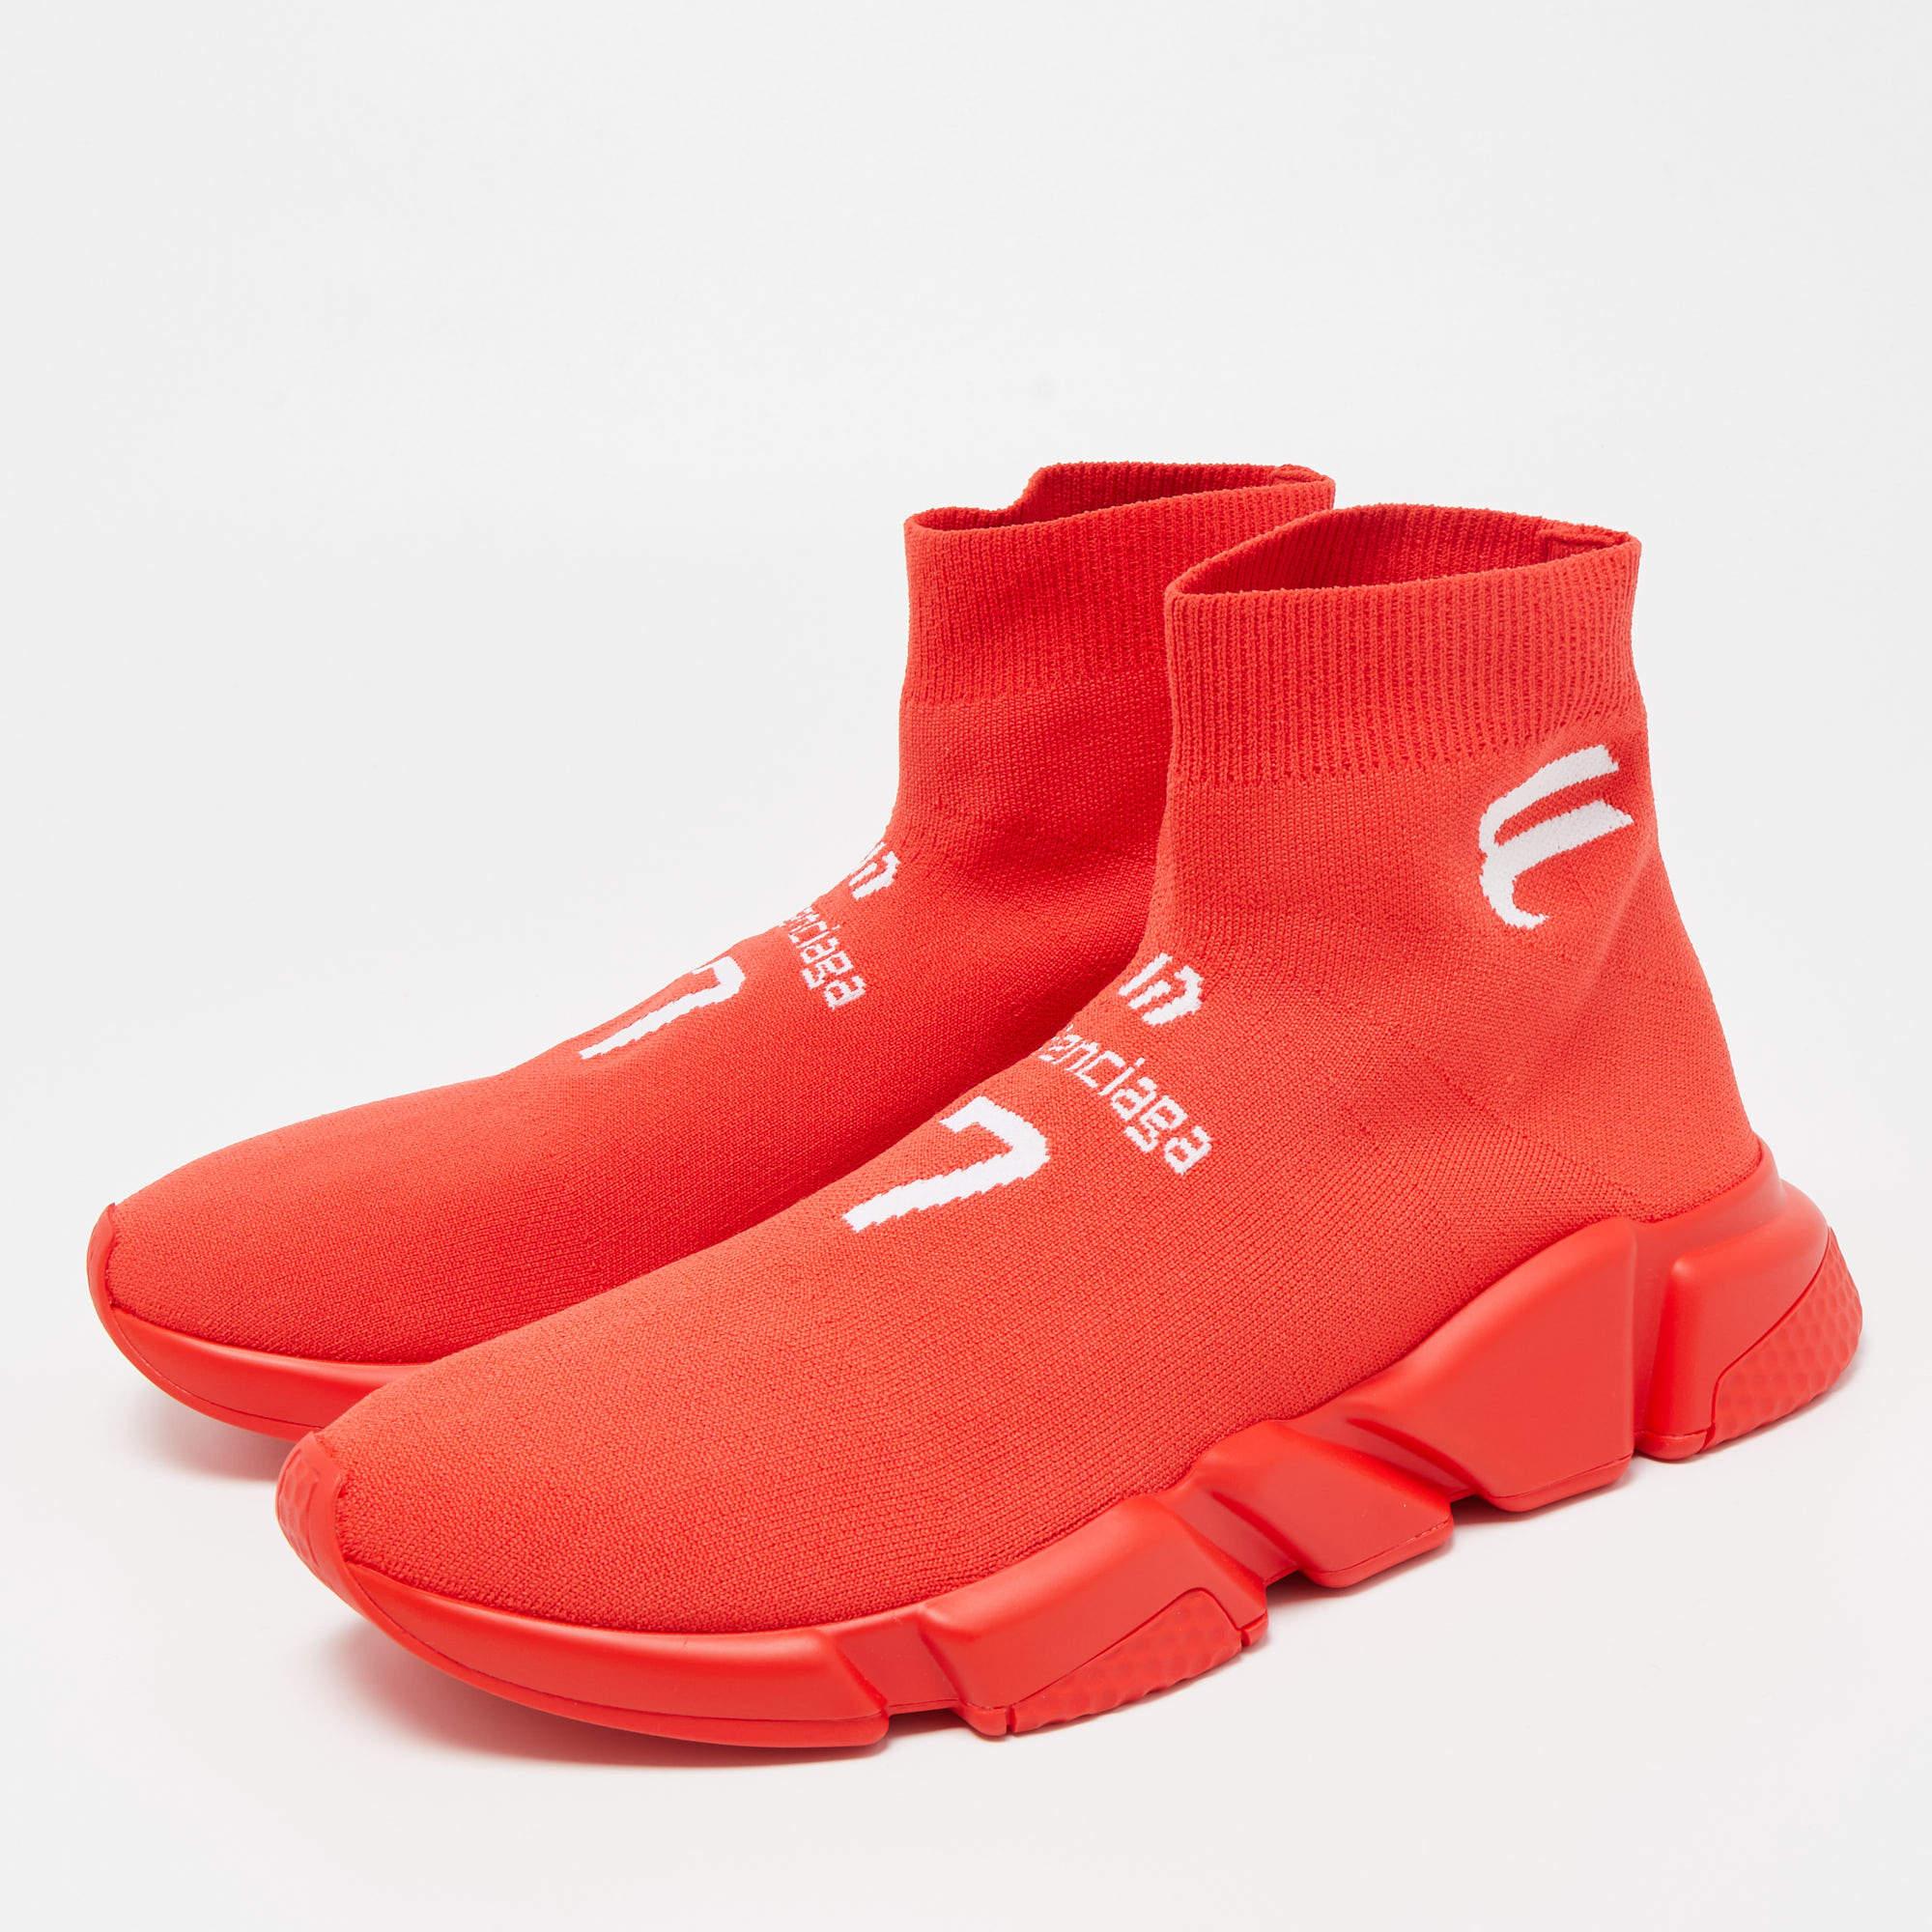 Balenciaga Red Knit Fabric Speed LT Soccer Sneakers  2